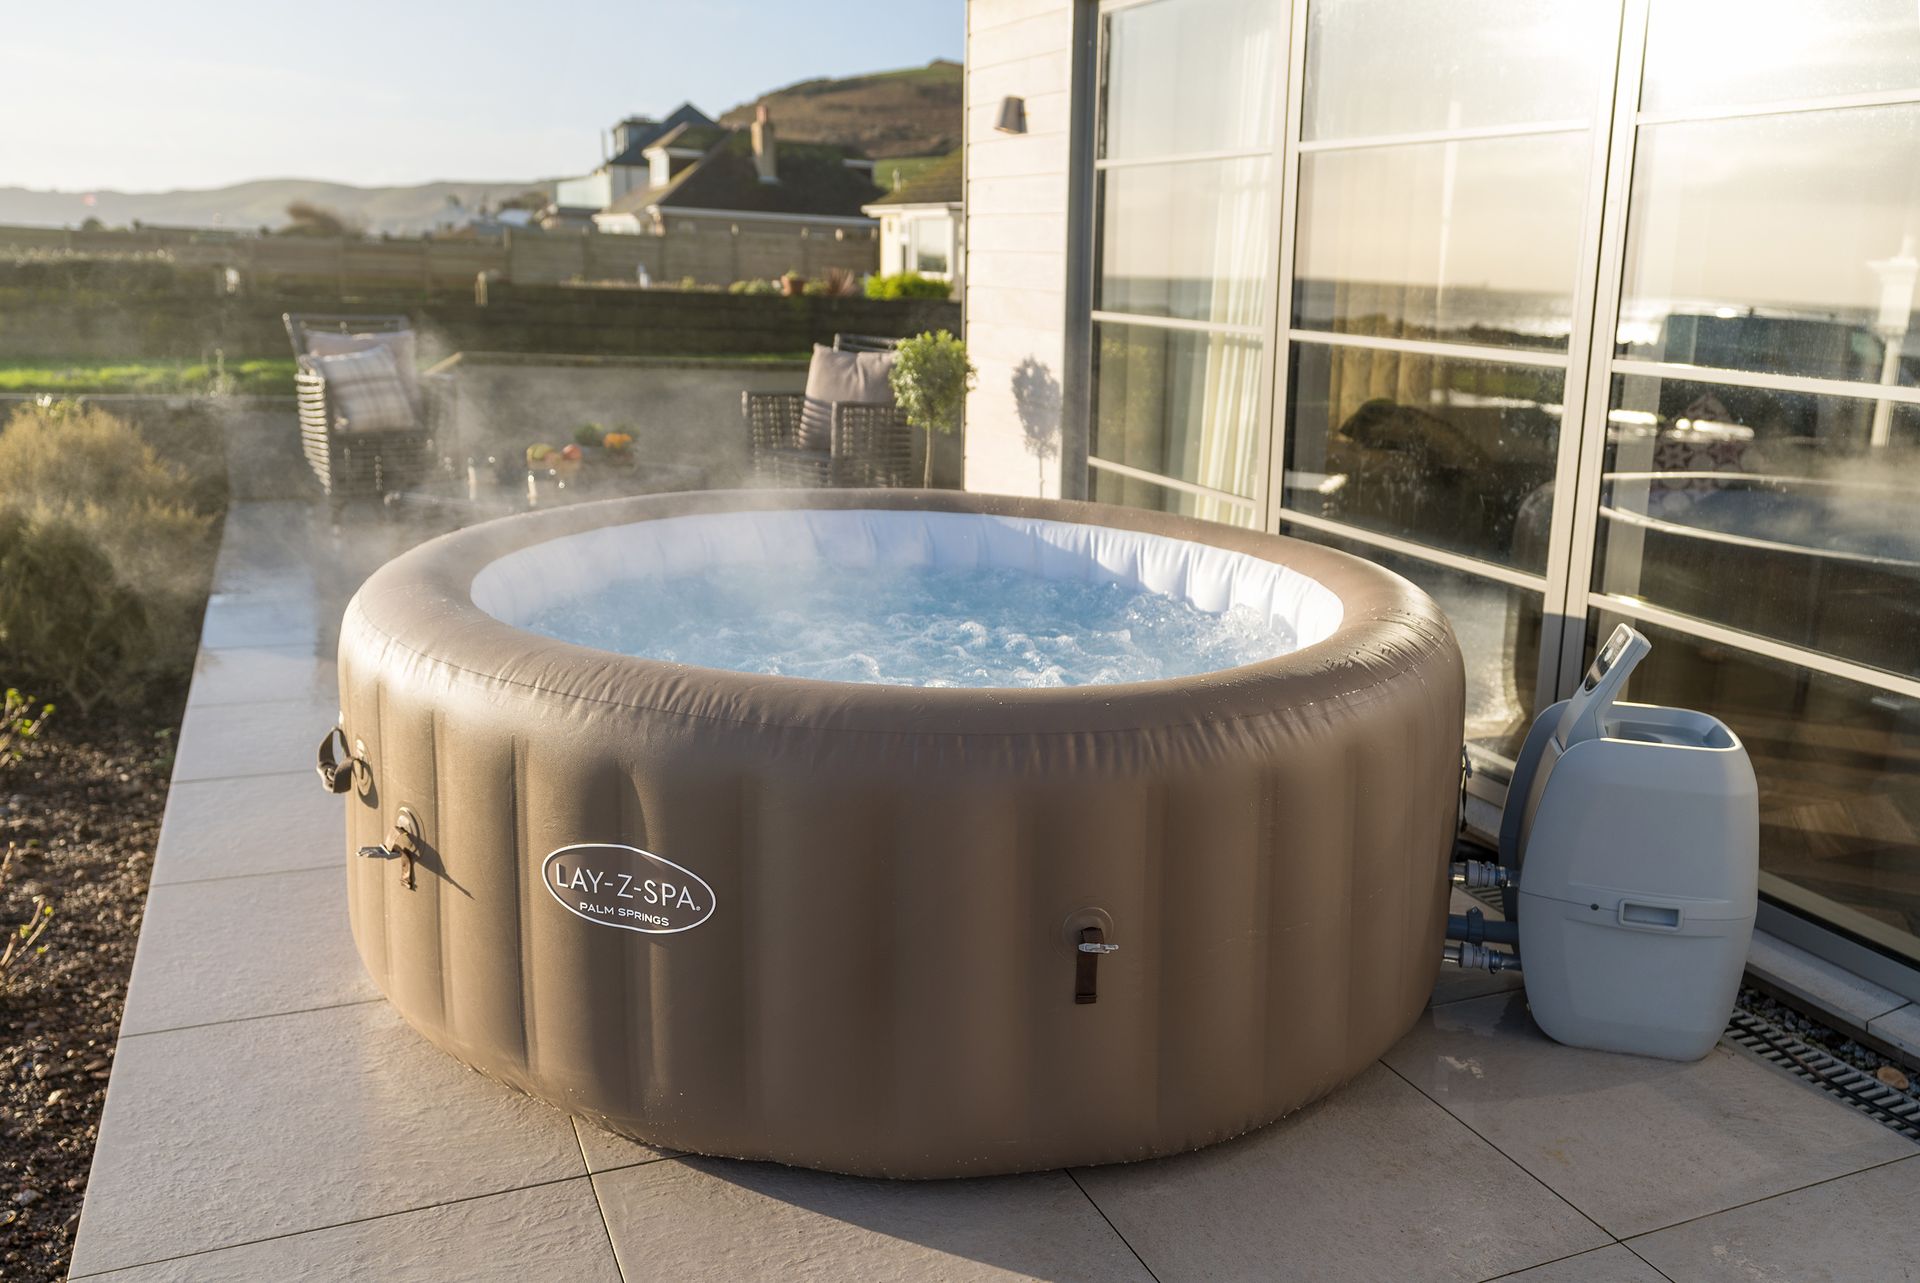 <p>                     If you fancy something portable, practical, and affordable, then an inflatable hot tub might be the one for you. These tubs come in various styles and sizes, and often have neat functions, such as color-changing lights and heat timers. Quick and easy to set up, they provide a retreat for relaxation without the big commitment of a permanent build.                   </p>                                      <p>                     ‘A Lay-Z-Spa inflatable hot tub offers the same relaxation and health and wellbeing benefits as a solid hot tub, but at a fraction of the price. And, there's the convenience of being able to easily set it up and pack it down as many times as you like,’ says the team at Lay-Z-Spa. 'The versatility of an inflatable hot tub also means you can choose your preferred spot to set it up and, should you move house, you can take it with you.'                   </p>